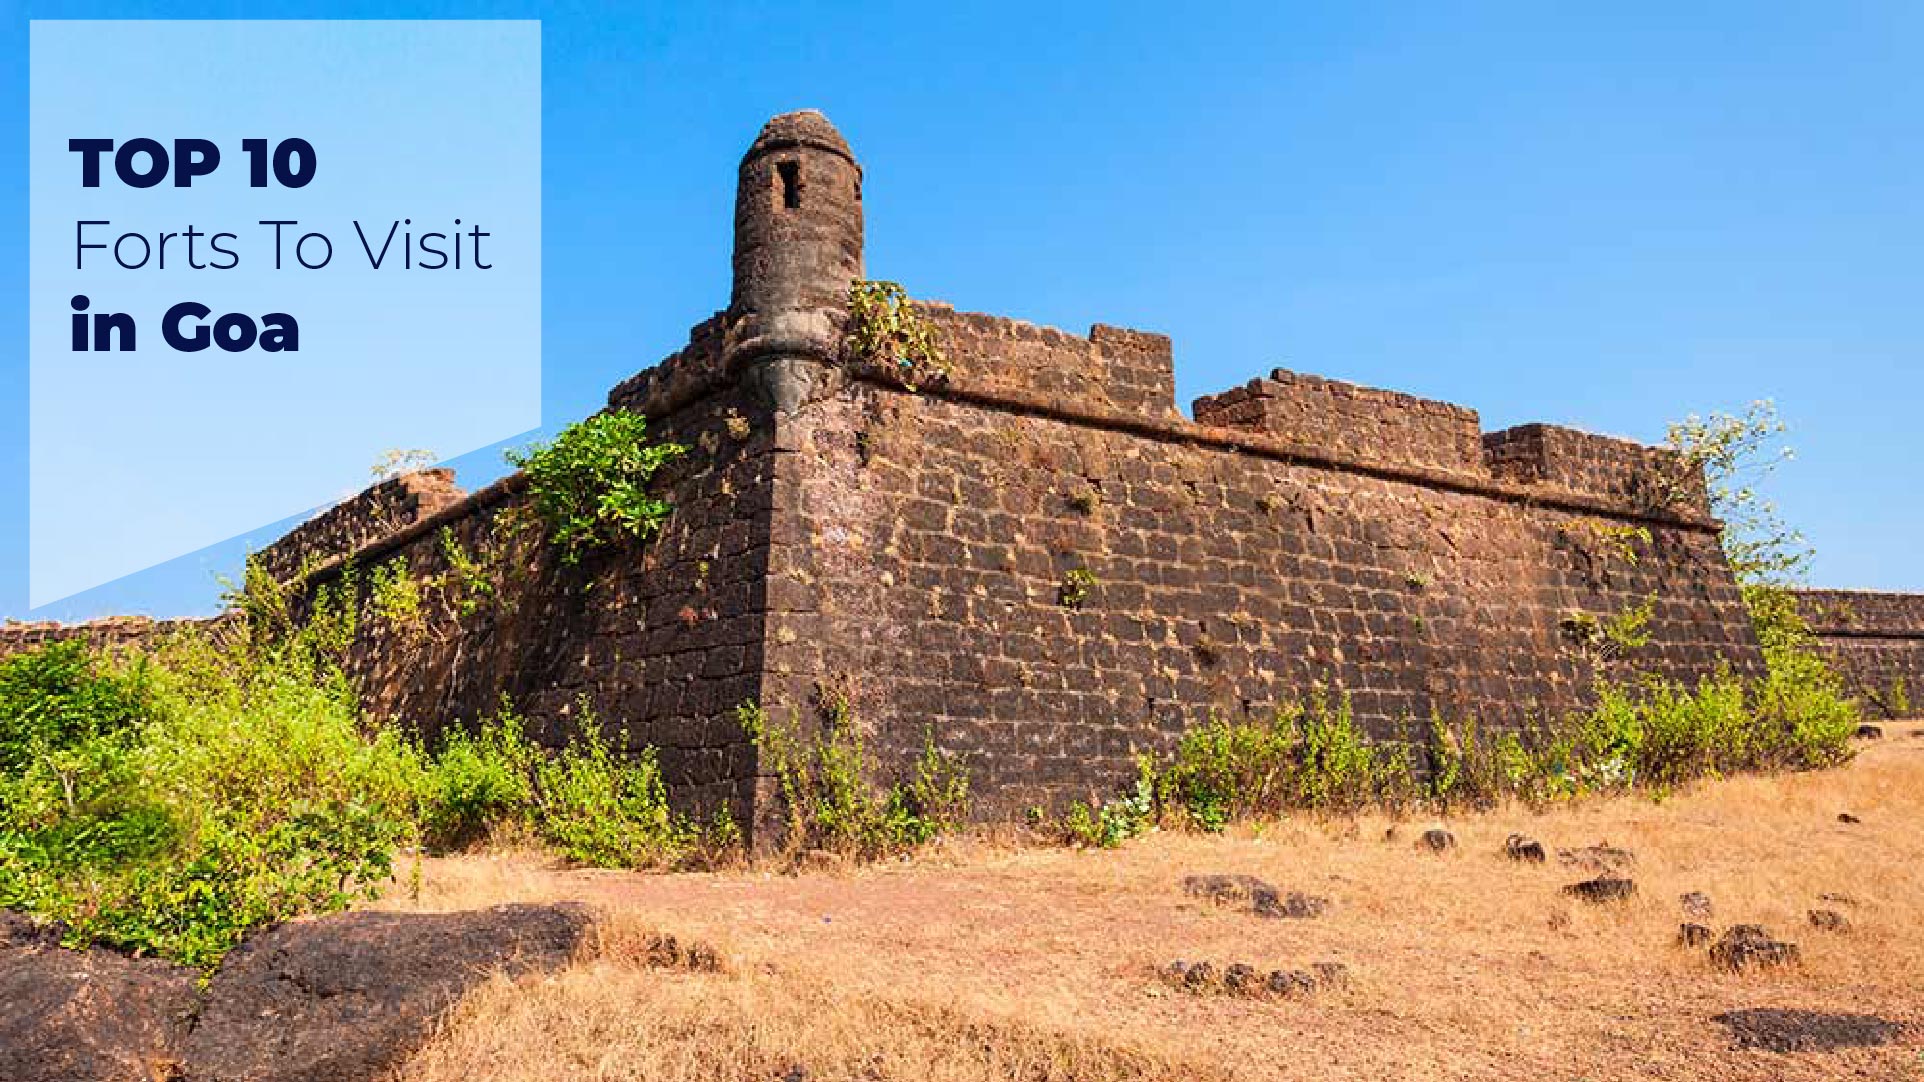 Top 10 Forts to visit in Goa